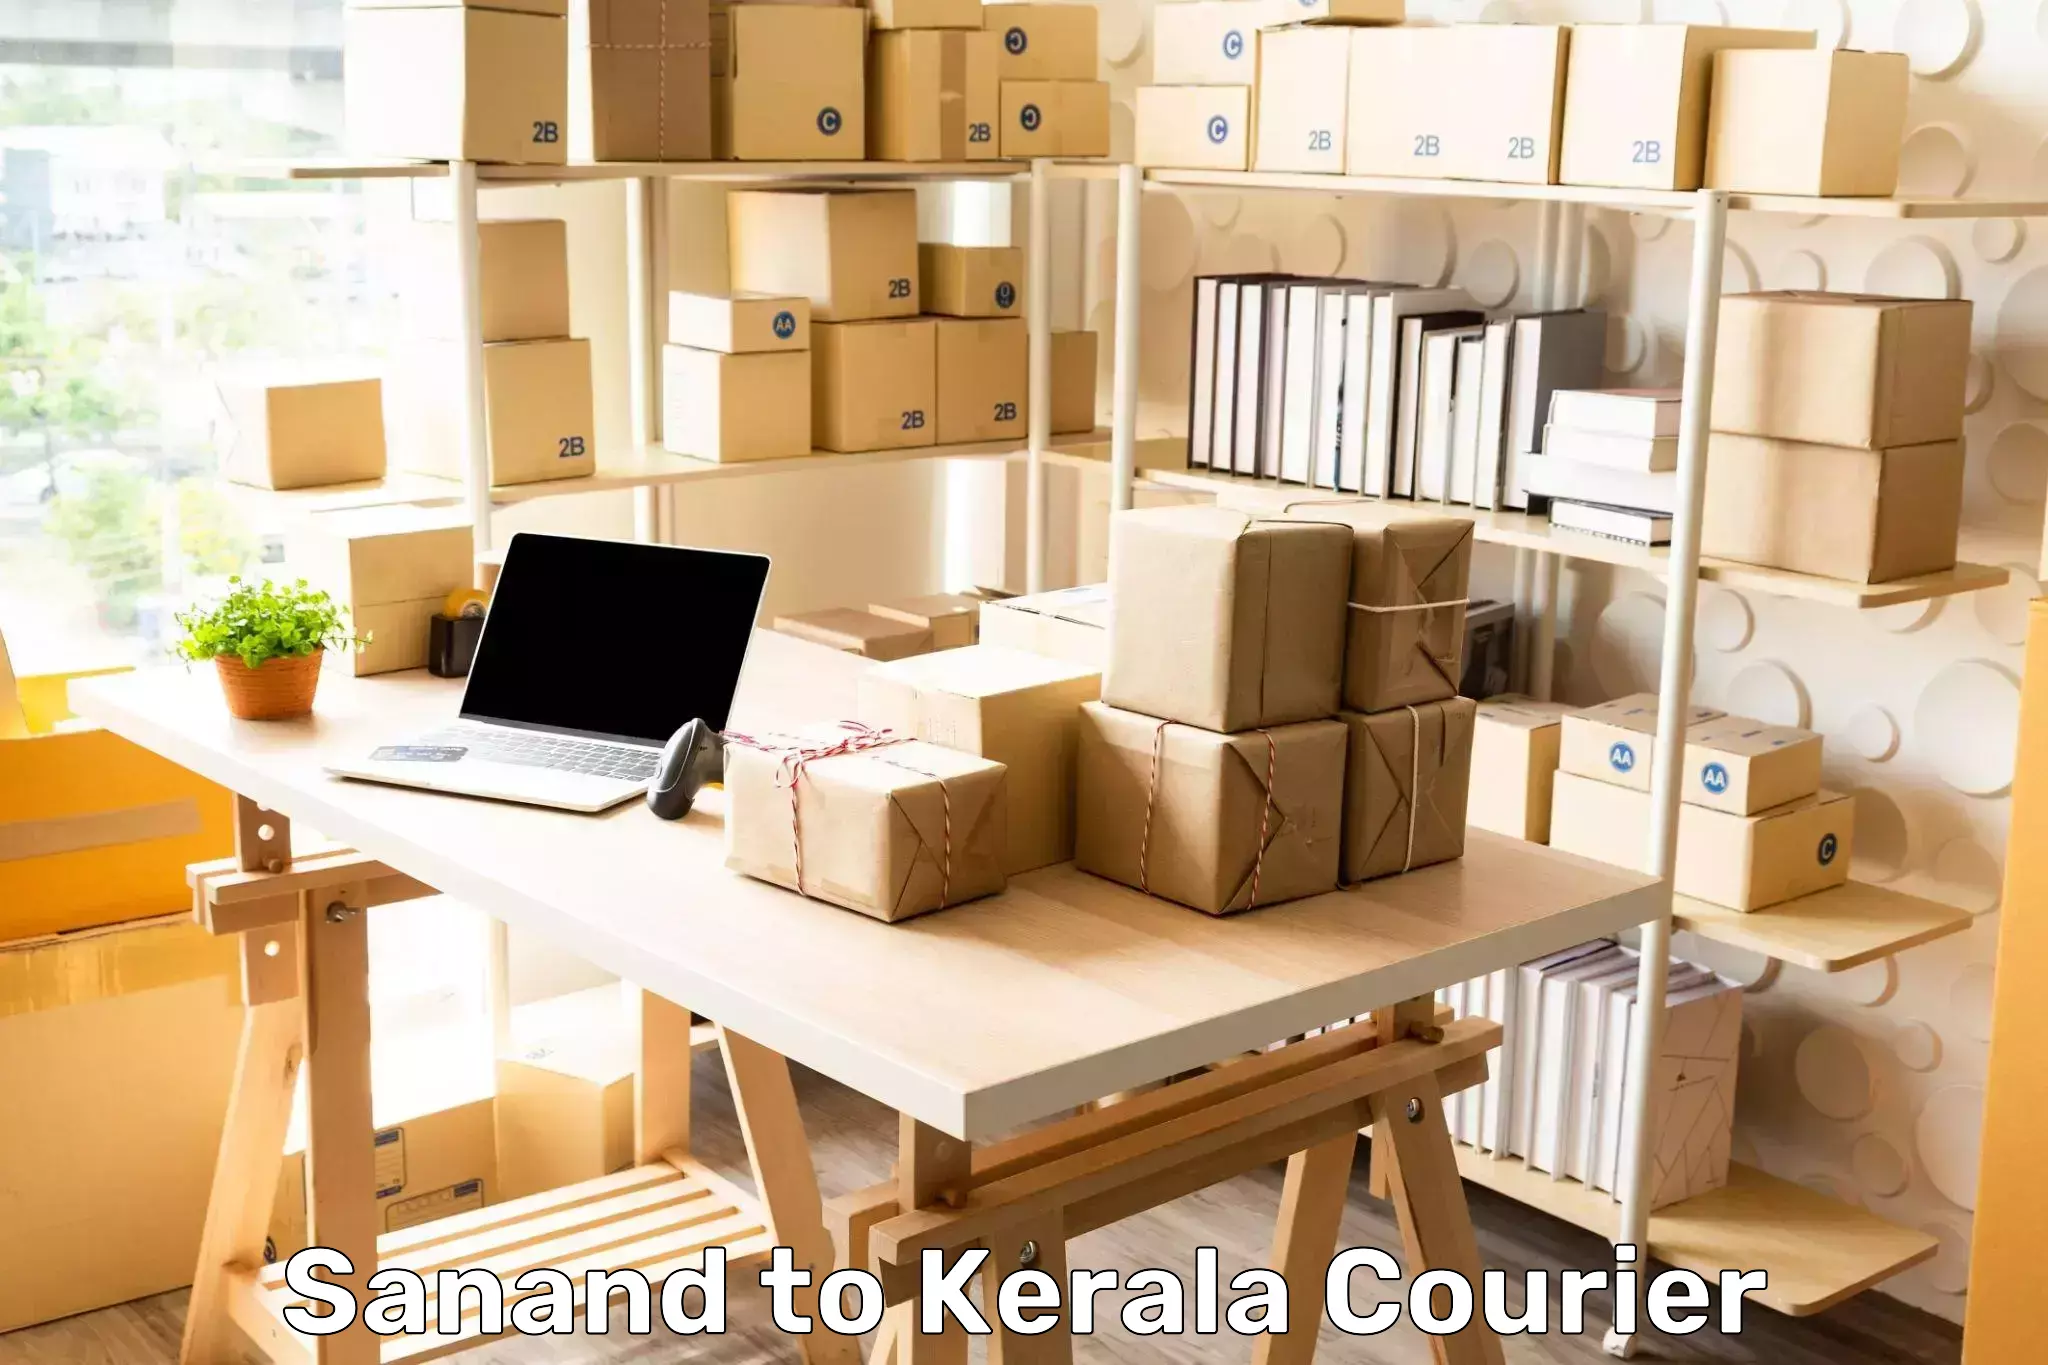 Flexible delivery schedules Sanand to Kollam